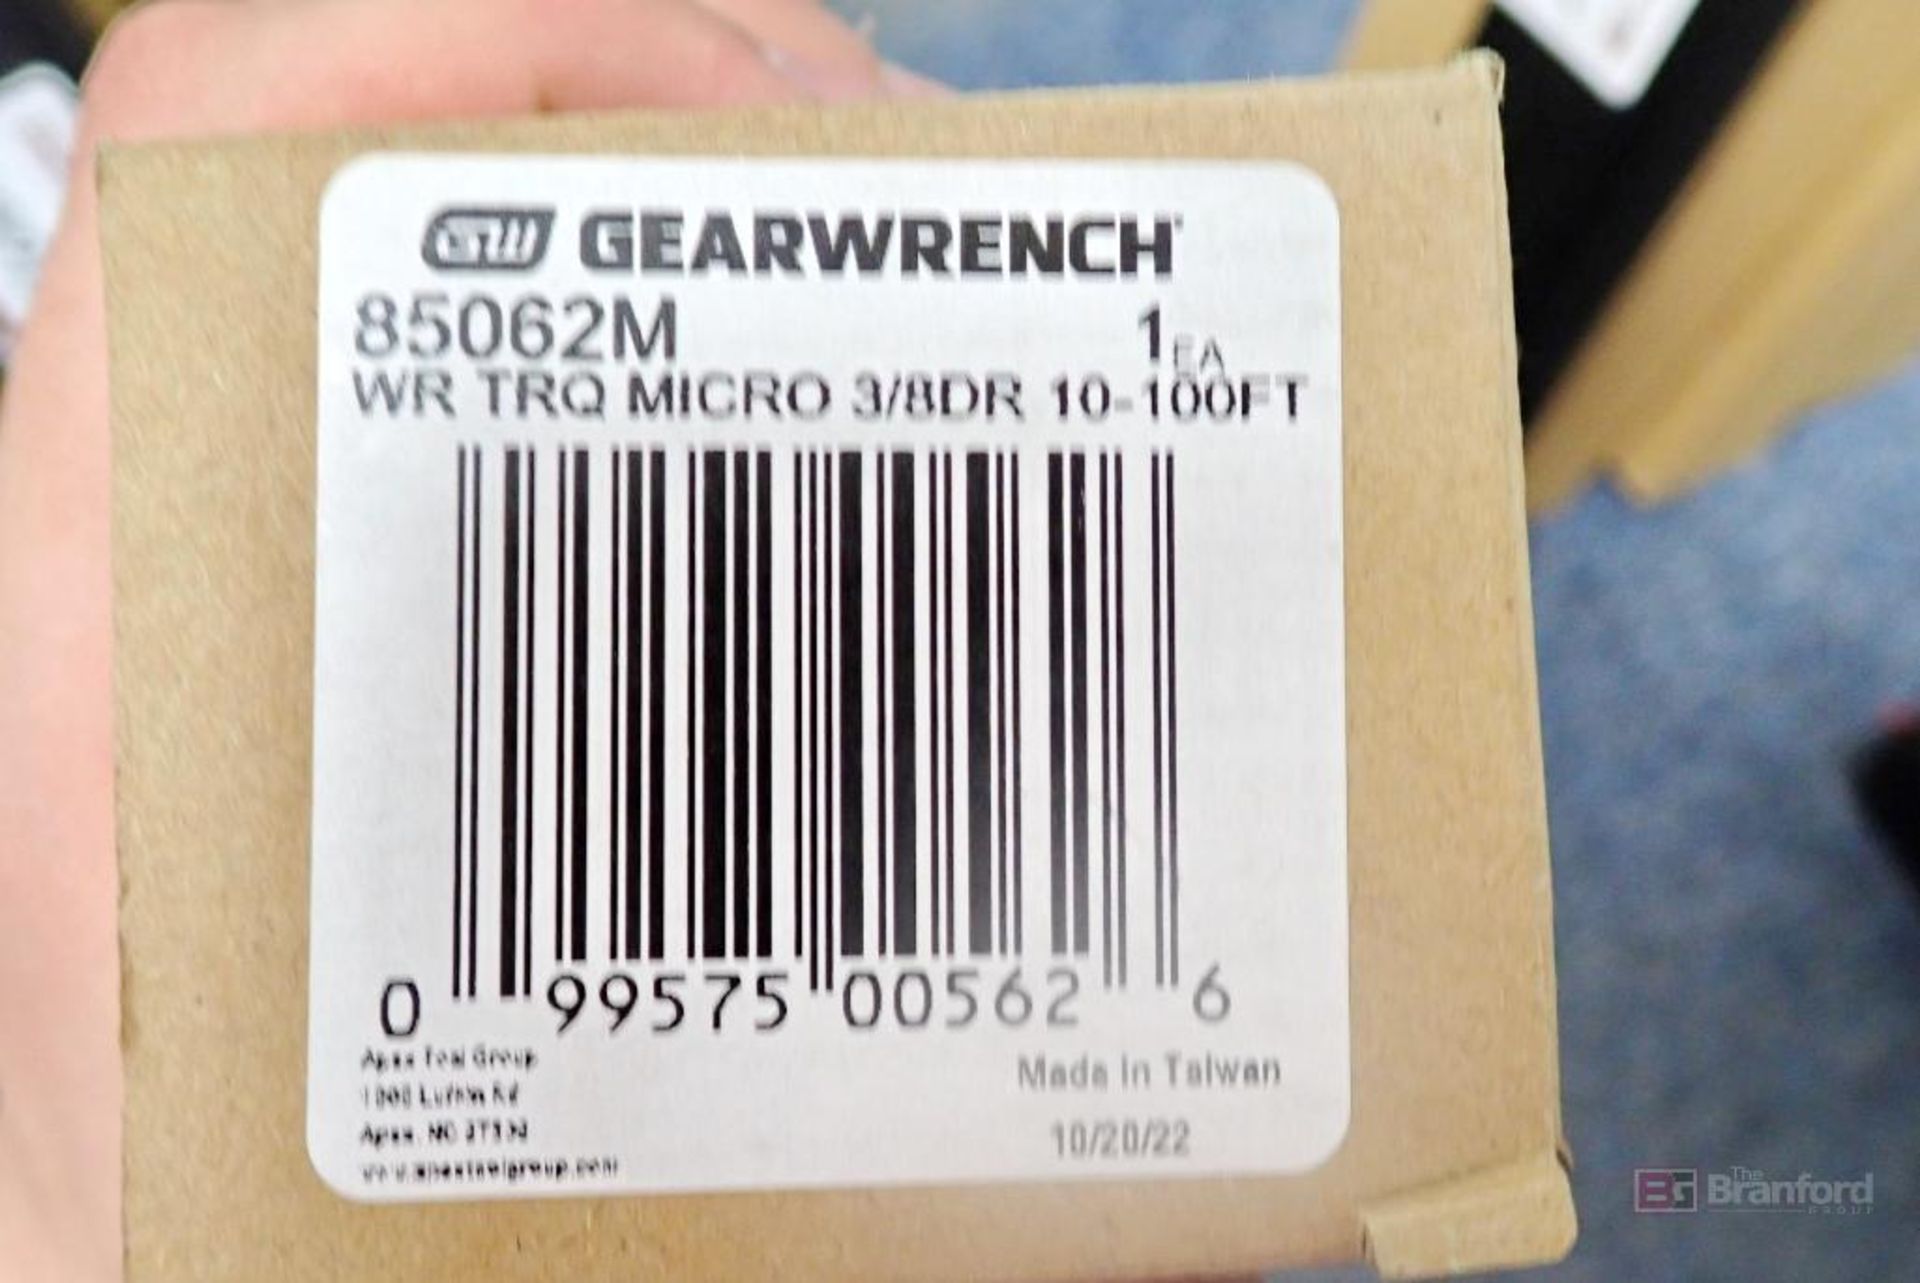 GearWrench 85062M (8612114) 3/8" Drive Micrometer Torque Wrench - Image 3 of 3